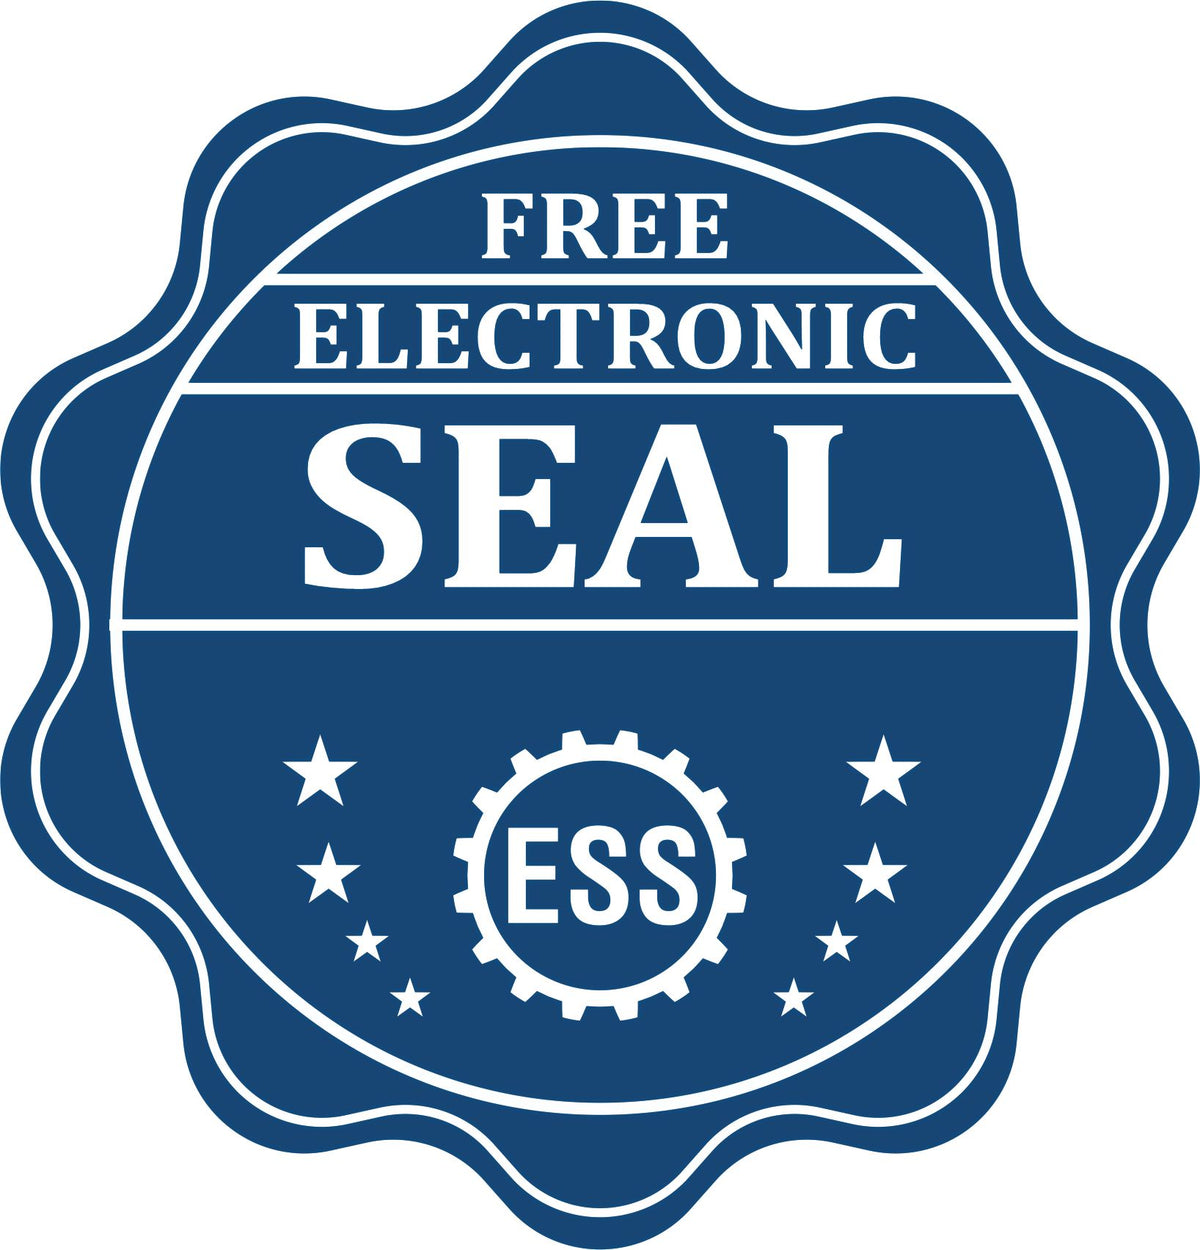 A badge showing a free electronic seal for the Slim Pre-Inked Utah Professional Engineer Seal Stamp with stars and the ESS gear on the emblem.